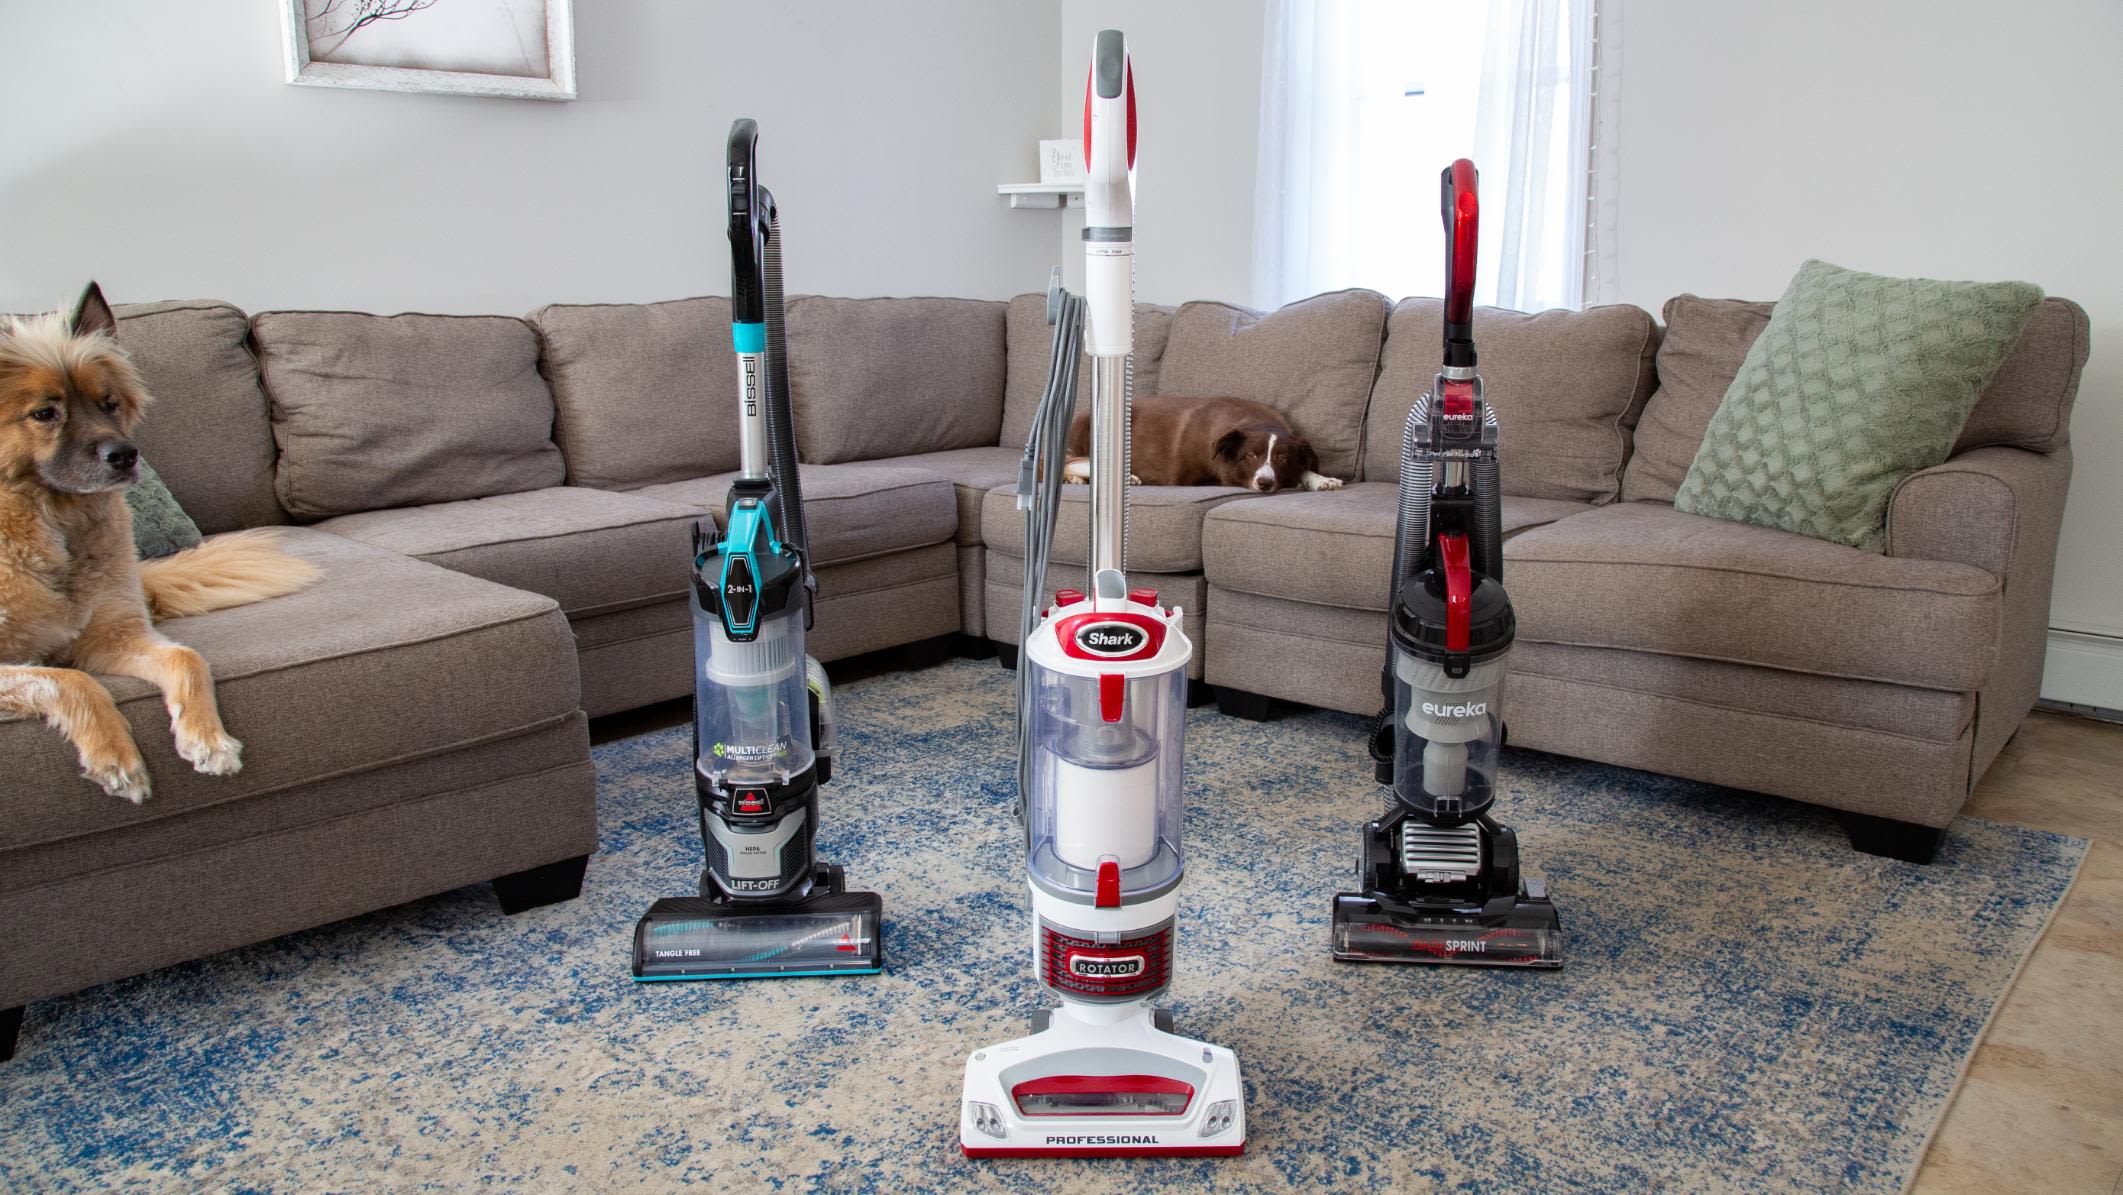 The Best Upright Vacuum In 2021 Cnn, Best Upright Vacuum Cleaner For Hardwood Floors And Carpet